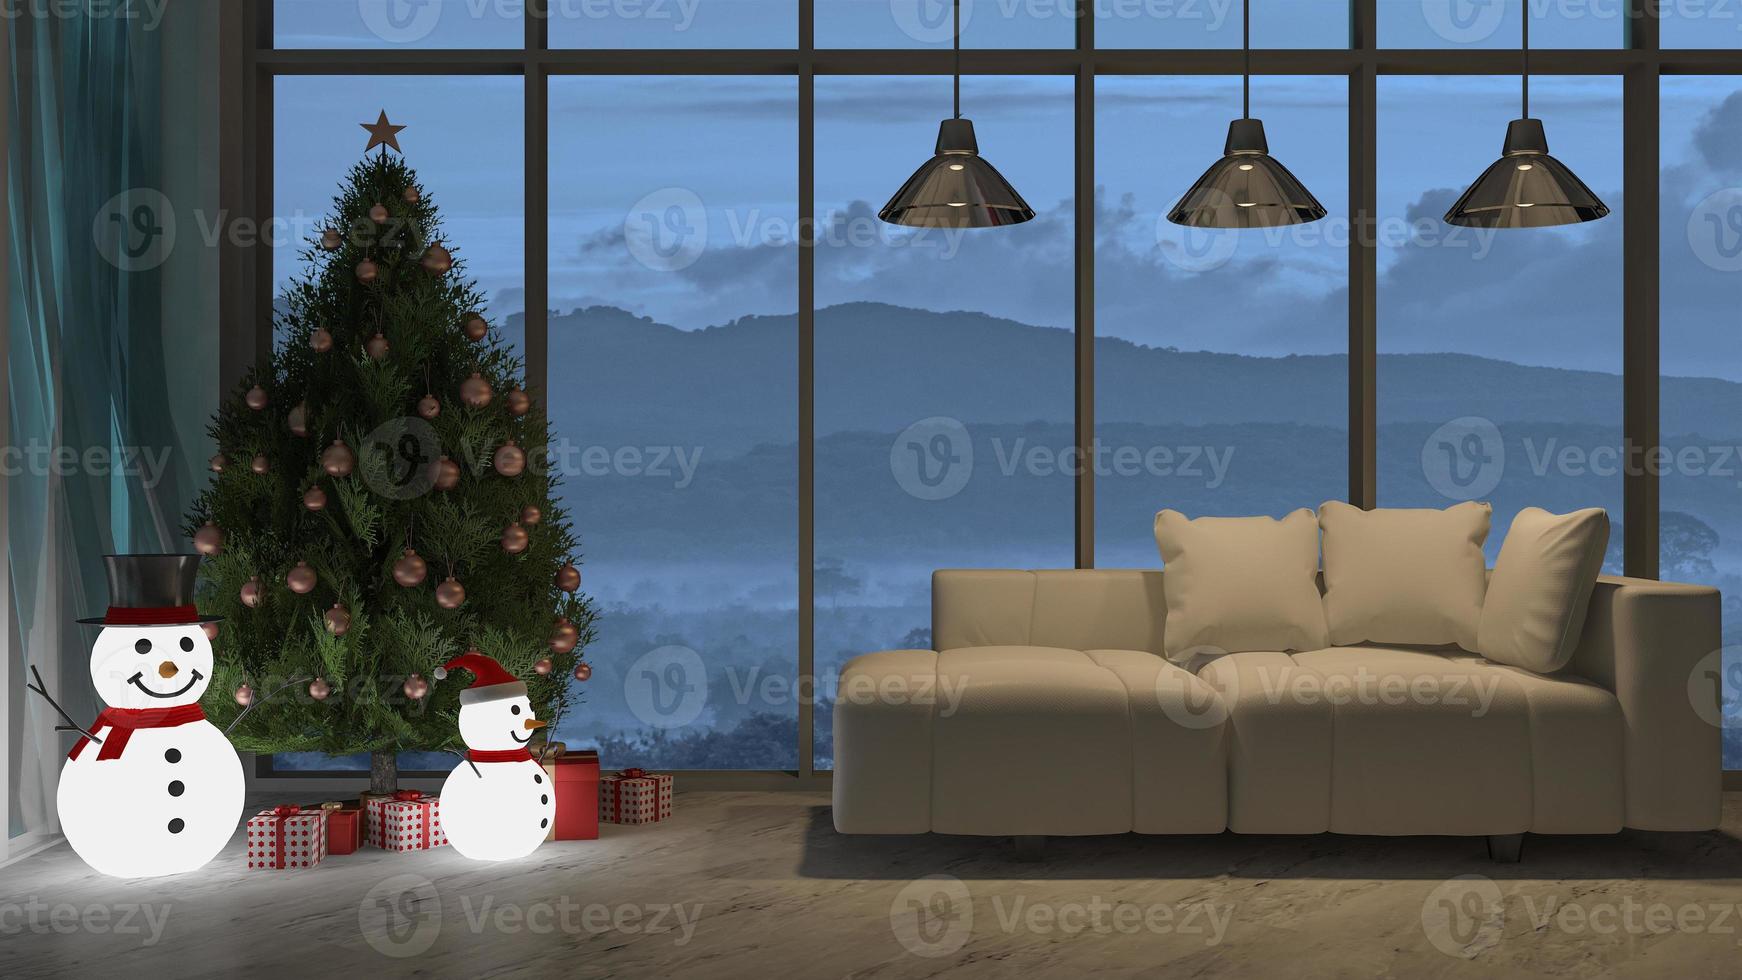 3d rendering image of living room on Christmas day photo